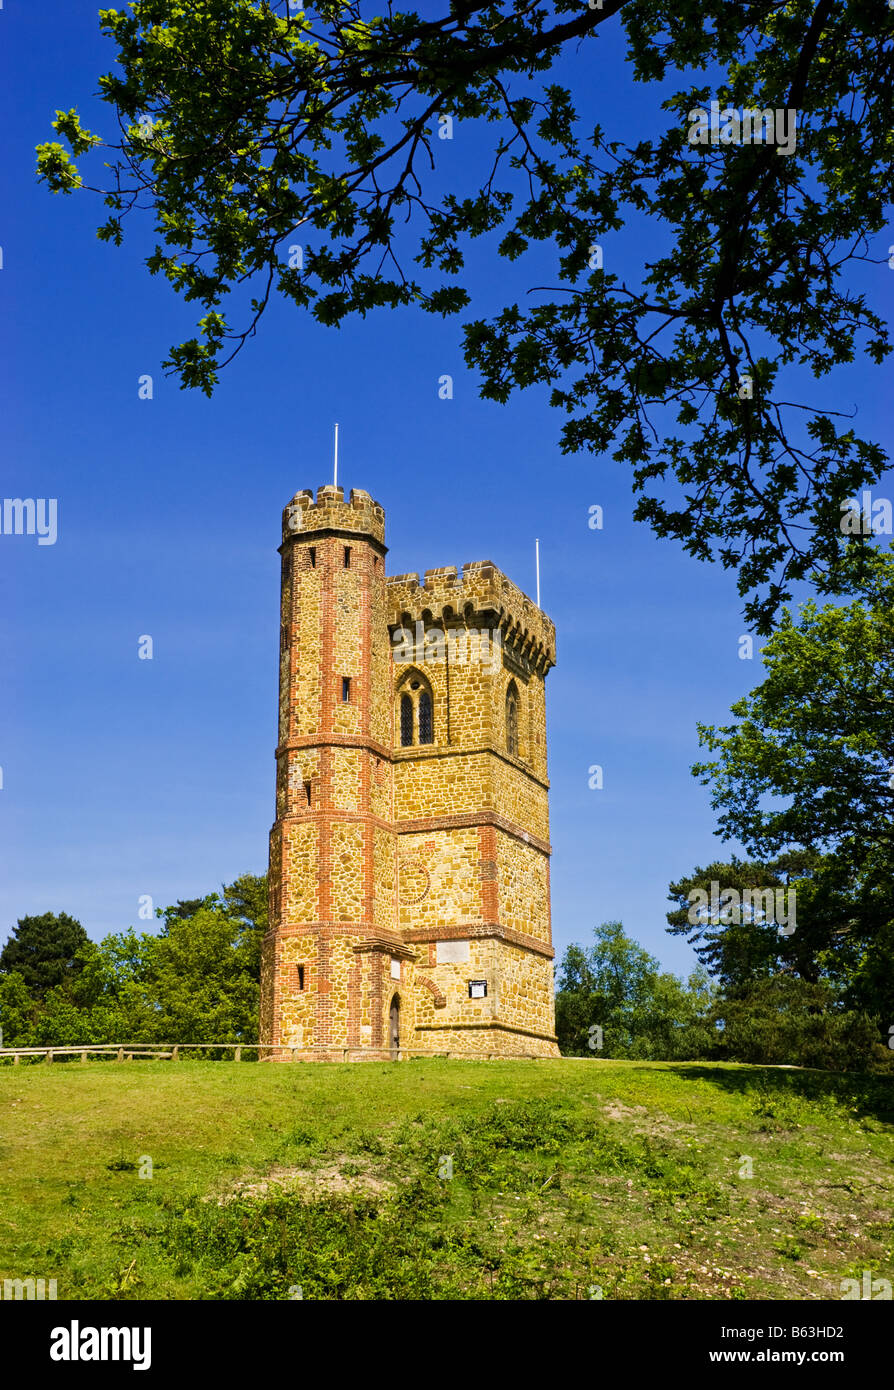 Leith Hill Tower, Surrey, UK Stockfoto